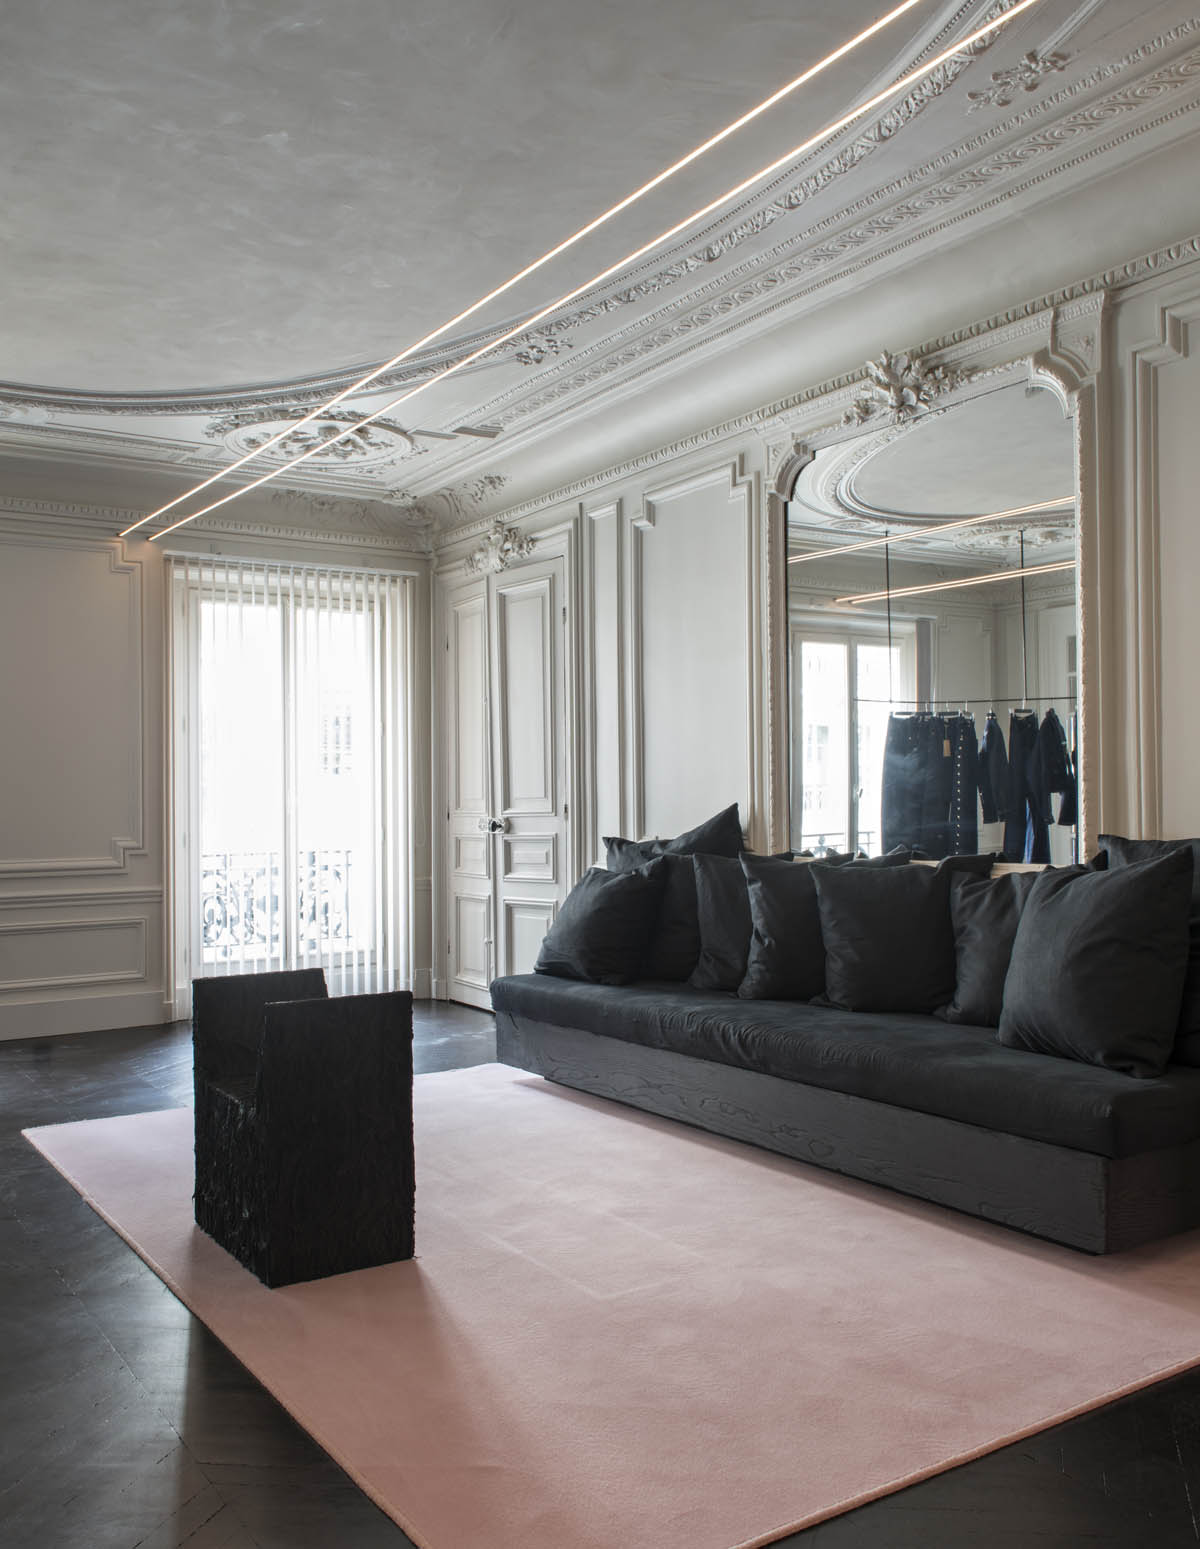 Black linen Sofa against a wall in haussmannian miror in the offices of Youssef Marquis agency